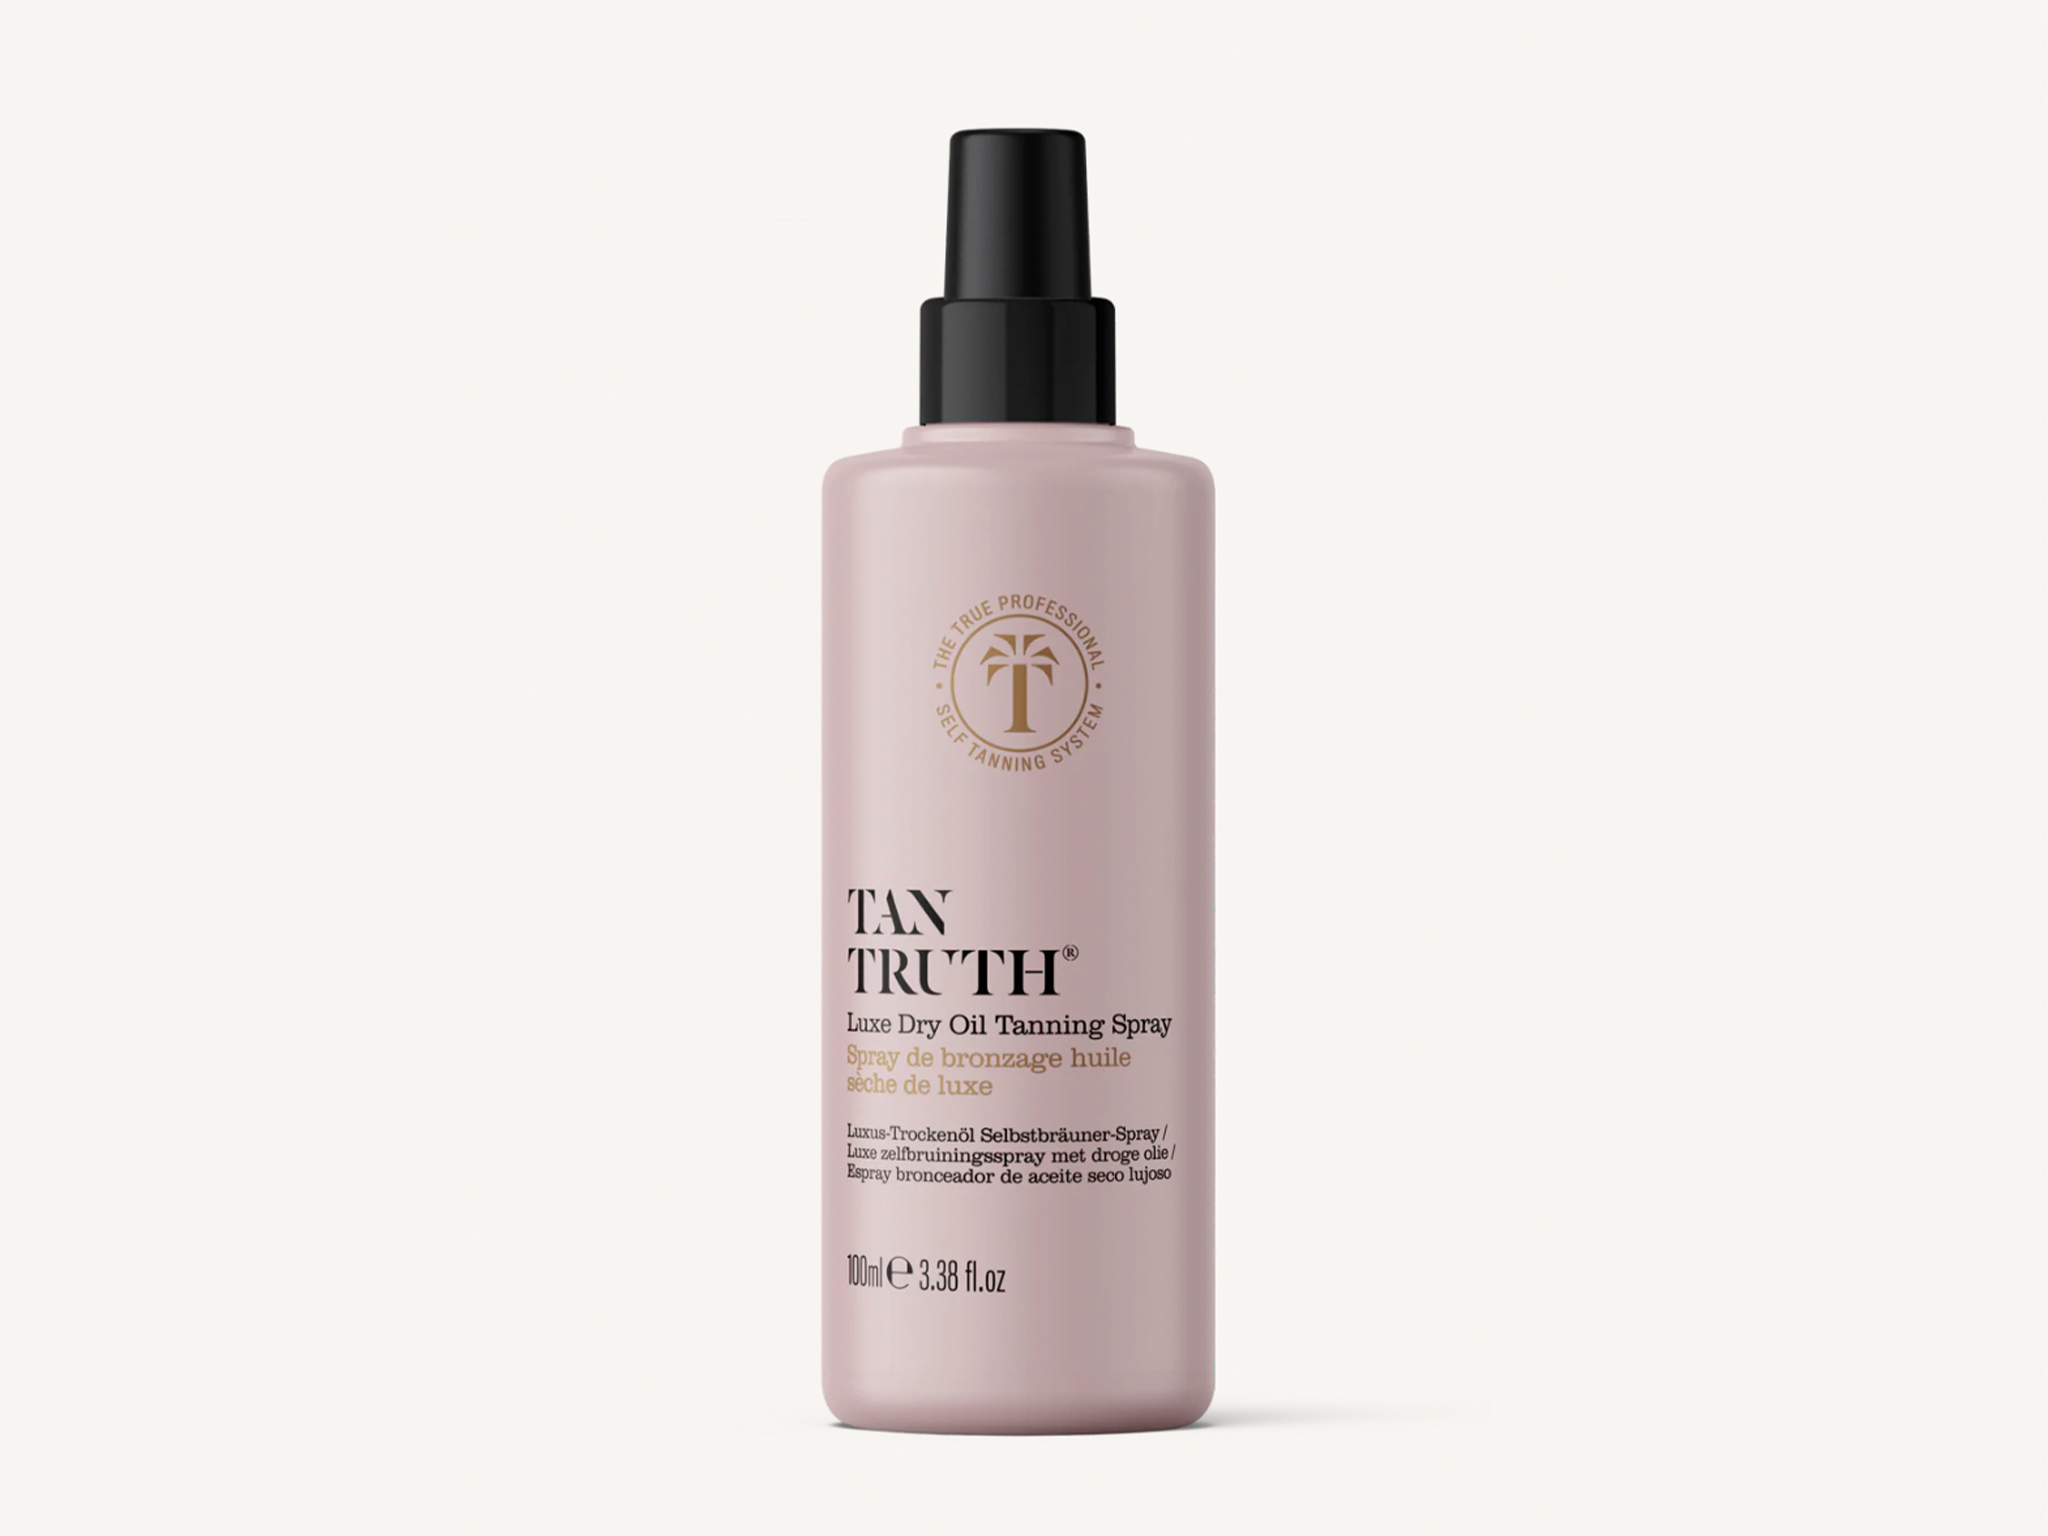 Tan Truth luxe dry oil tanning spray